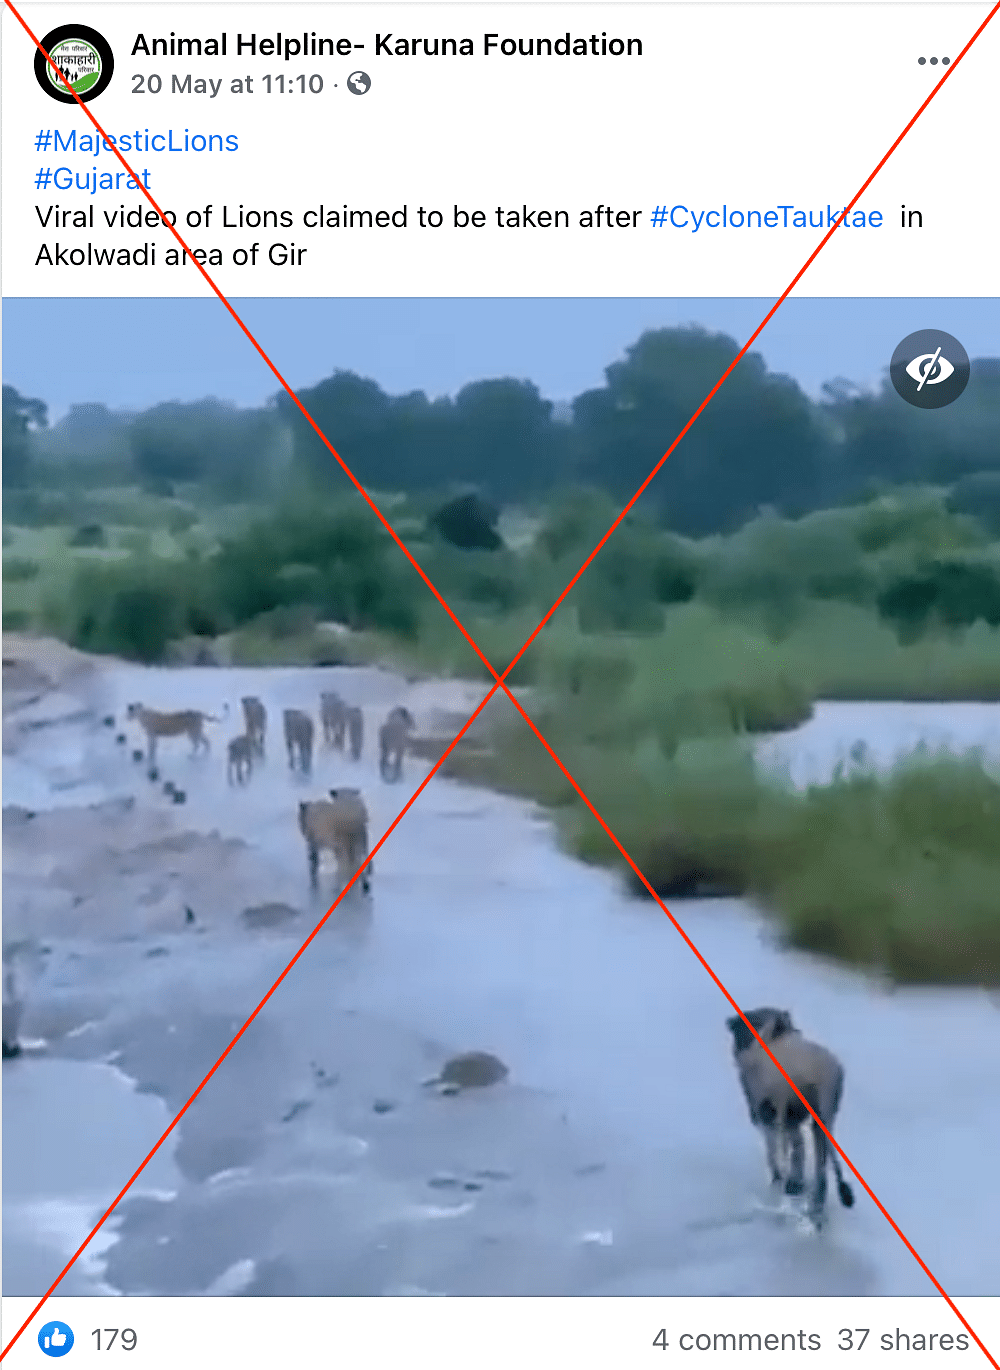  The video actually shows lions walking across South Africa’s MalaMala Game Reserve after a foiled hunt.